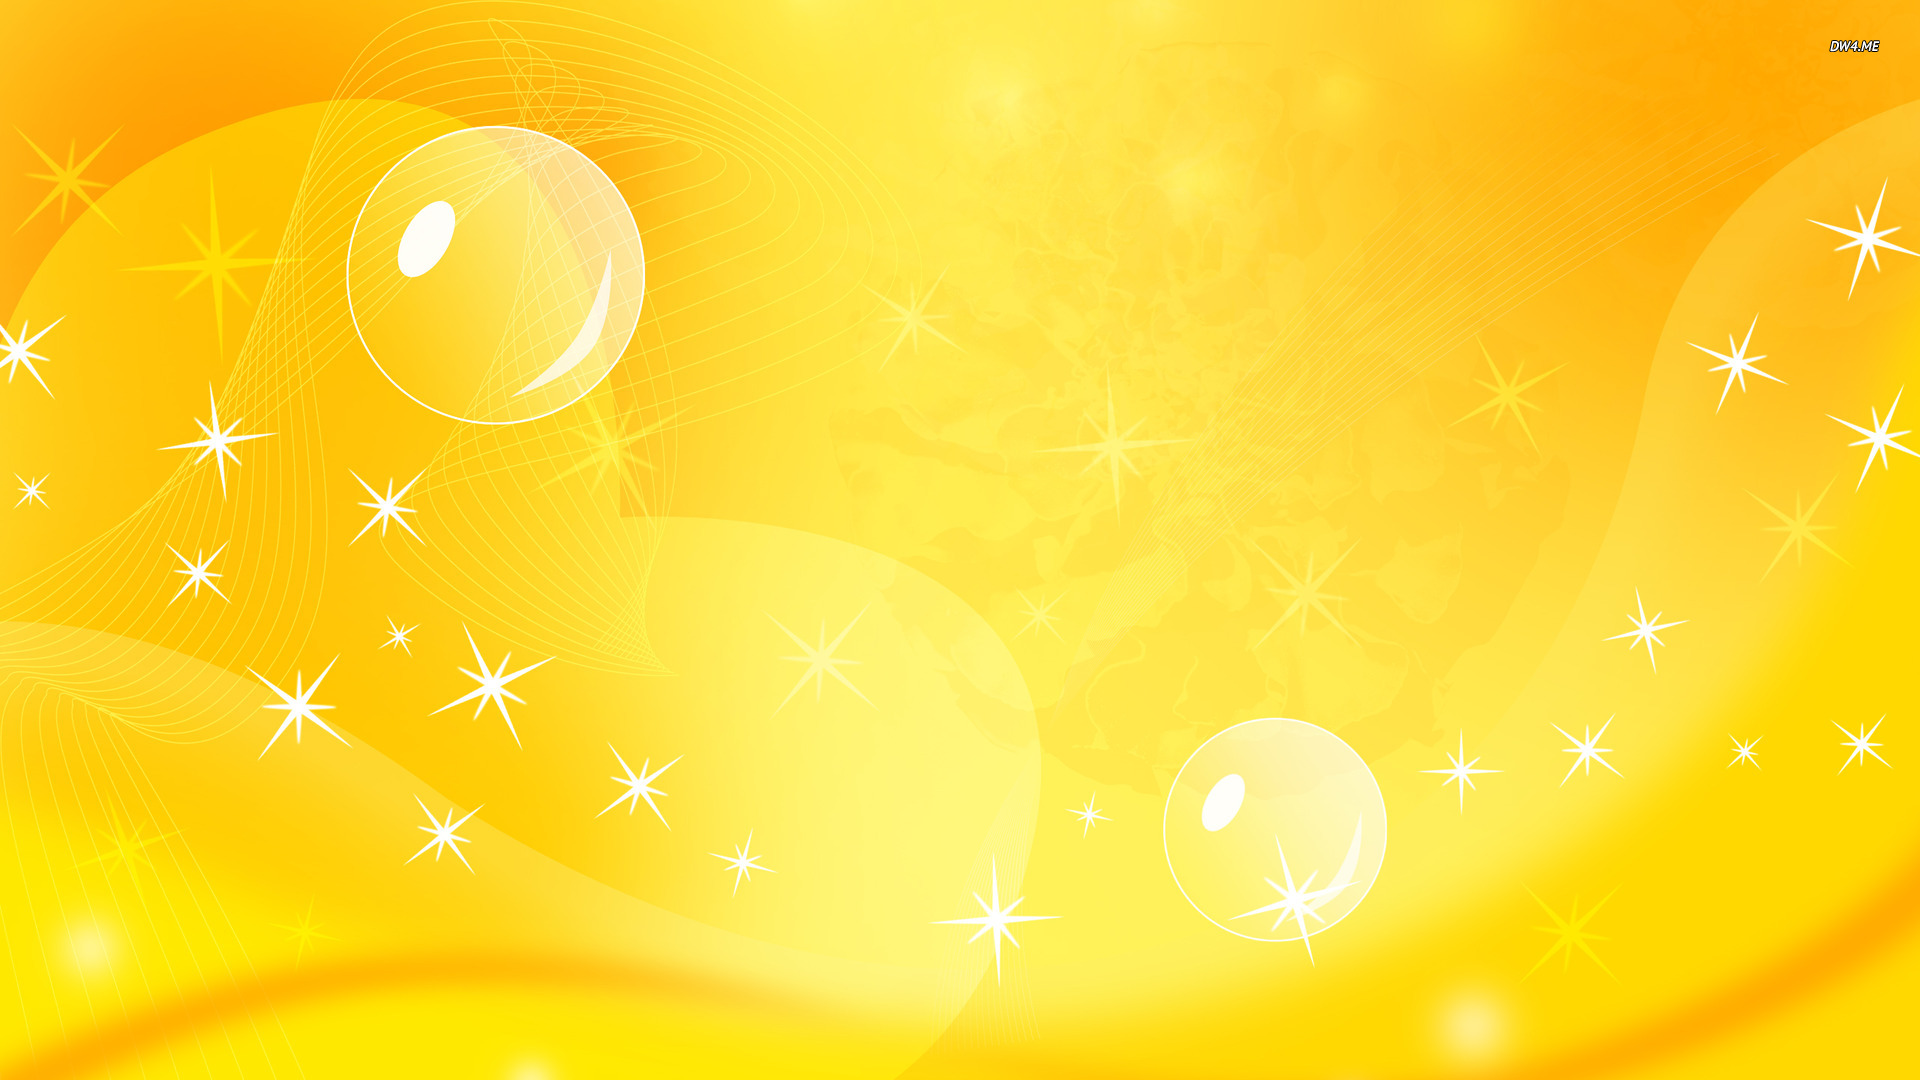  Yellow Wallpaper Sparknotes 1 High Resolution Wallpaper Full Size 1920x1080